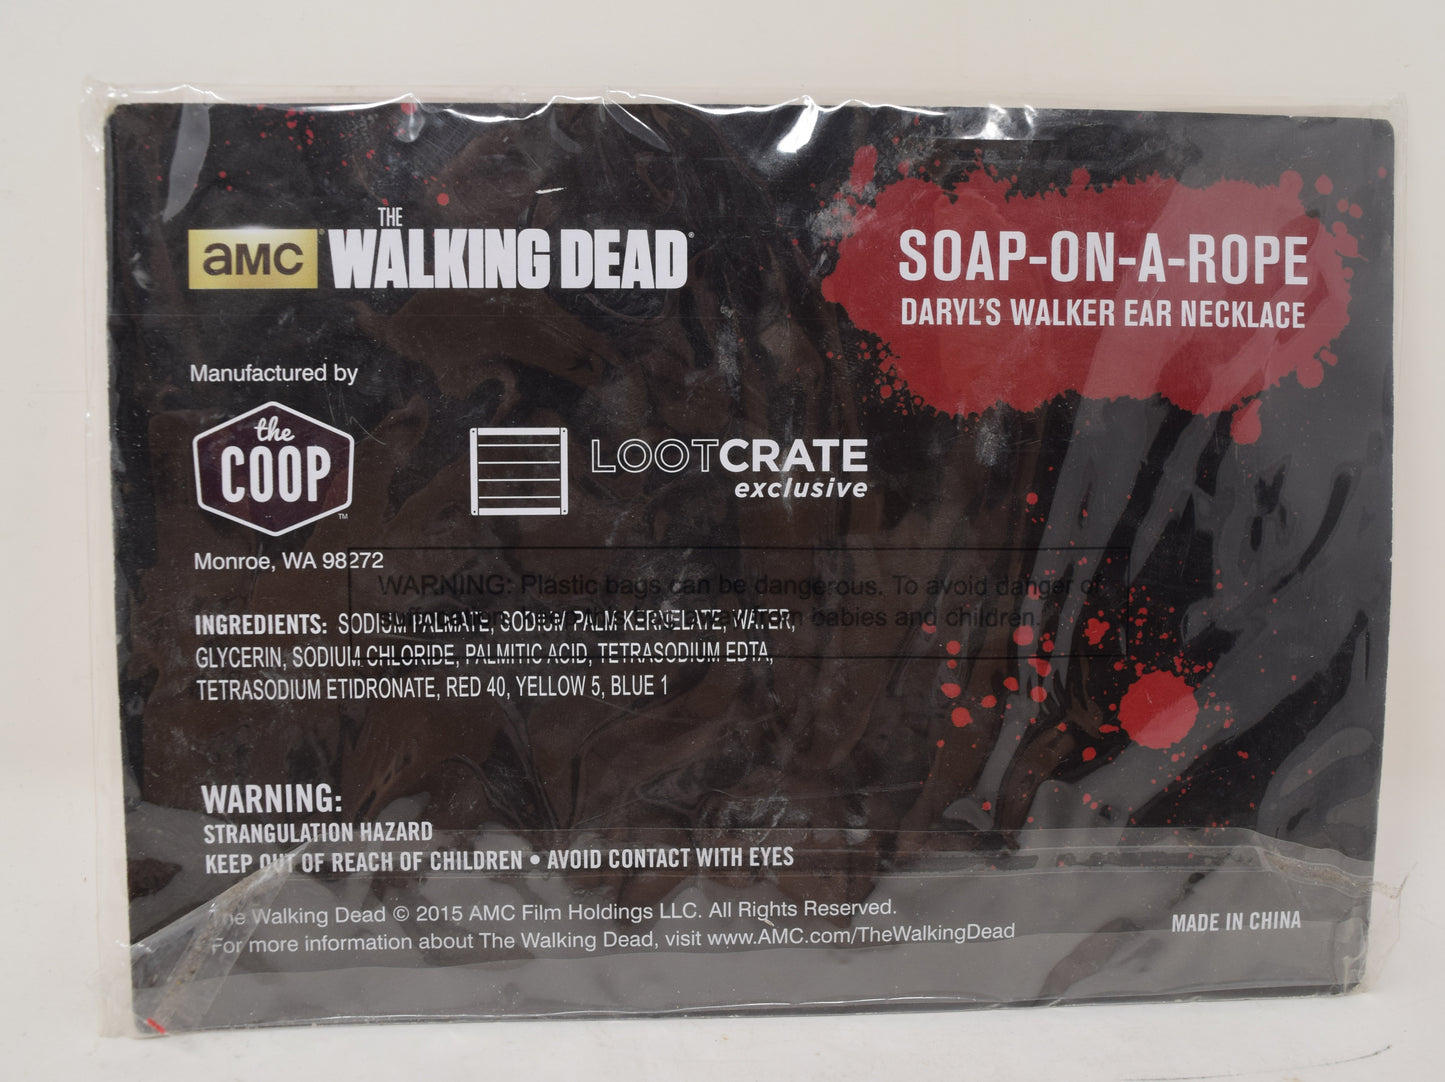 Walking Dead Daryl's Ear Necklace Soap On A Rope Lootcrate AMC Zombie New